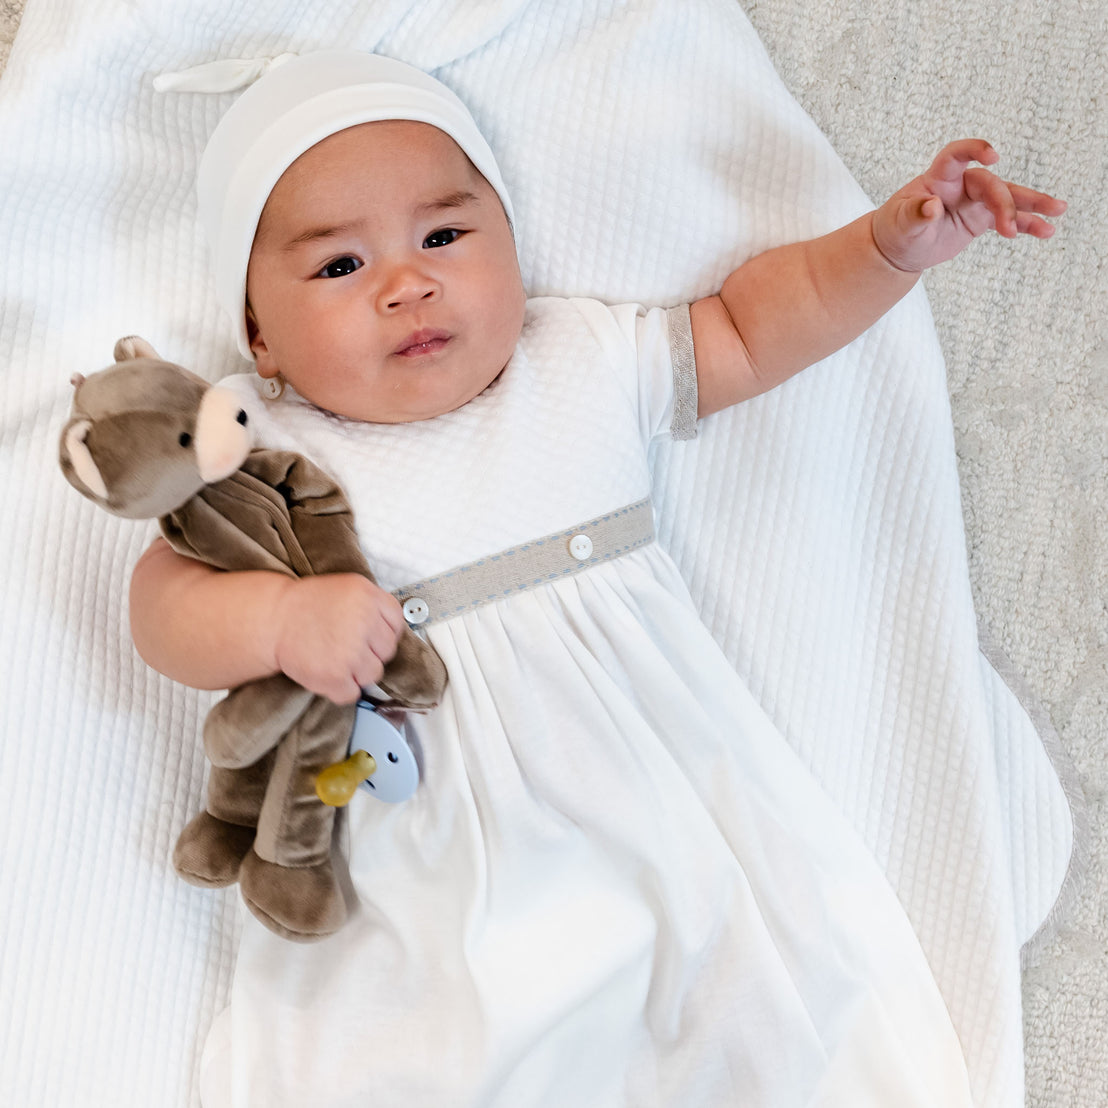 A baby dressed in a boutique white dress and headband lies on a soft blanket, holding an Austin Bear Buddy pacifier holder, looking at the camera with a gentle expression.